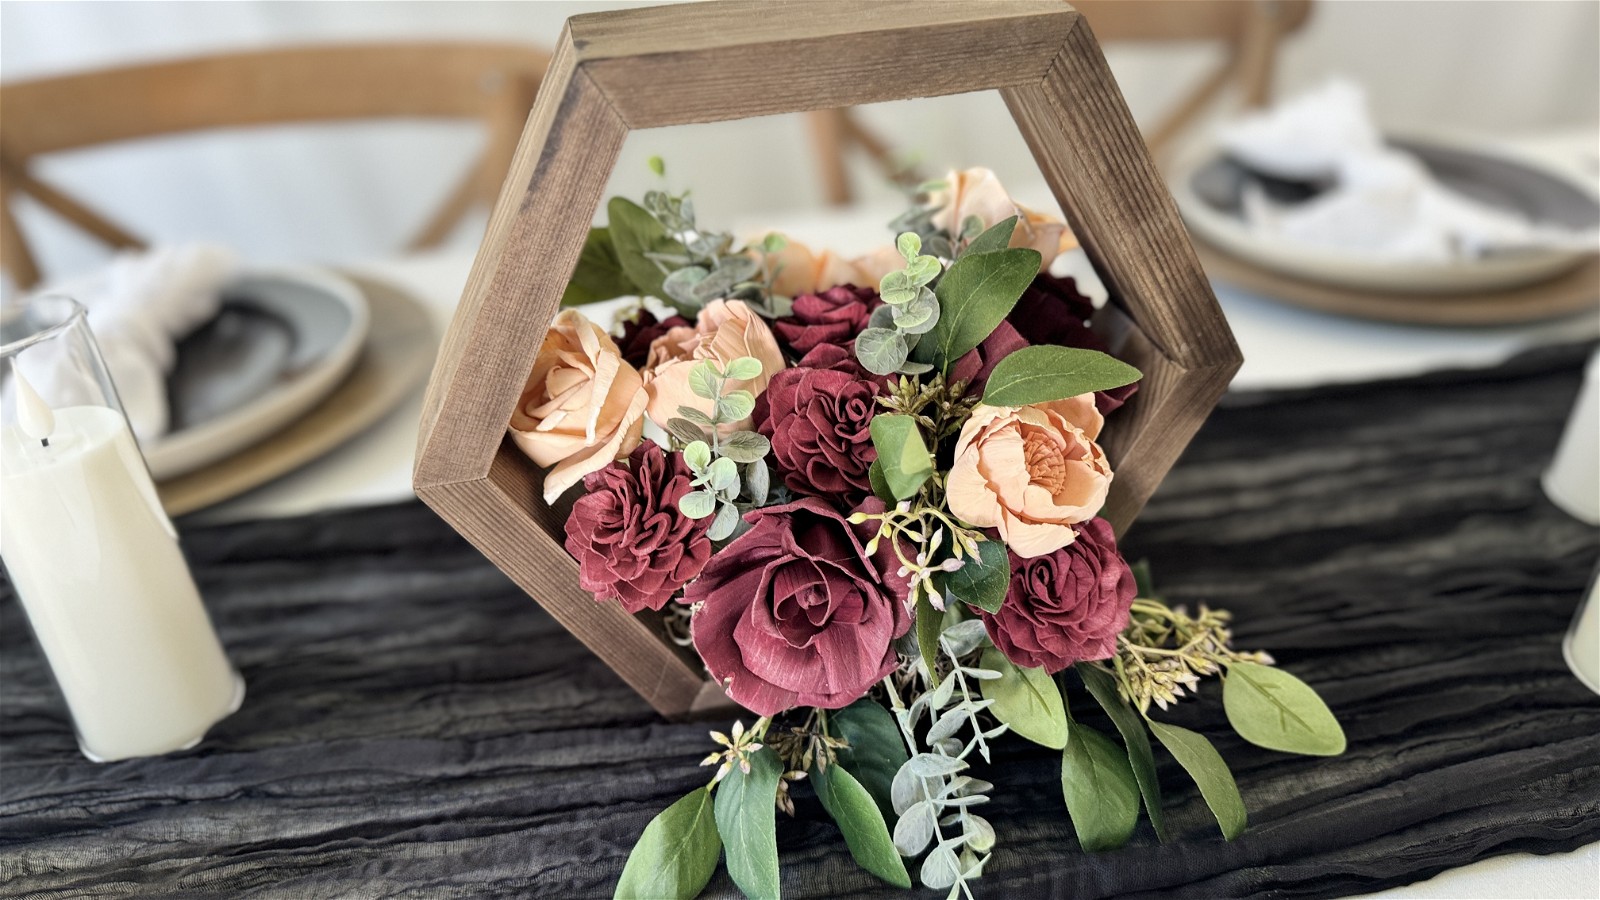 Image of Wood Hexagon Arrangement - DIY Wedding Centerpiece Step-by-Step Instructions and Tutorial